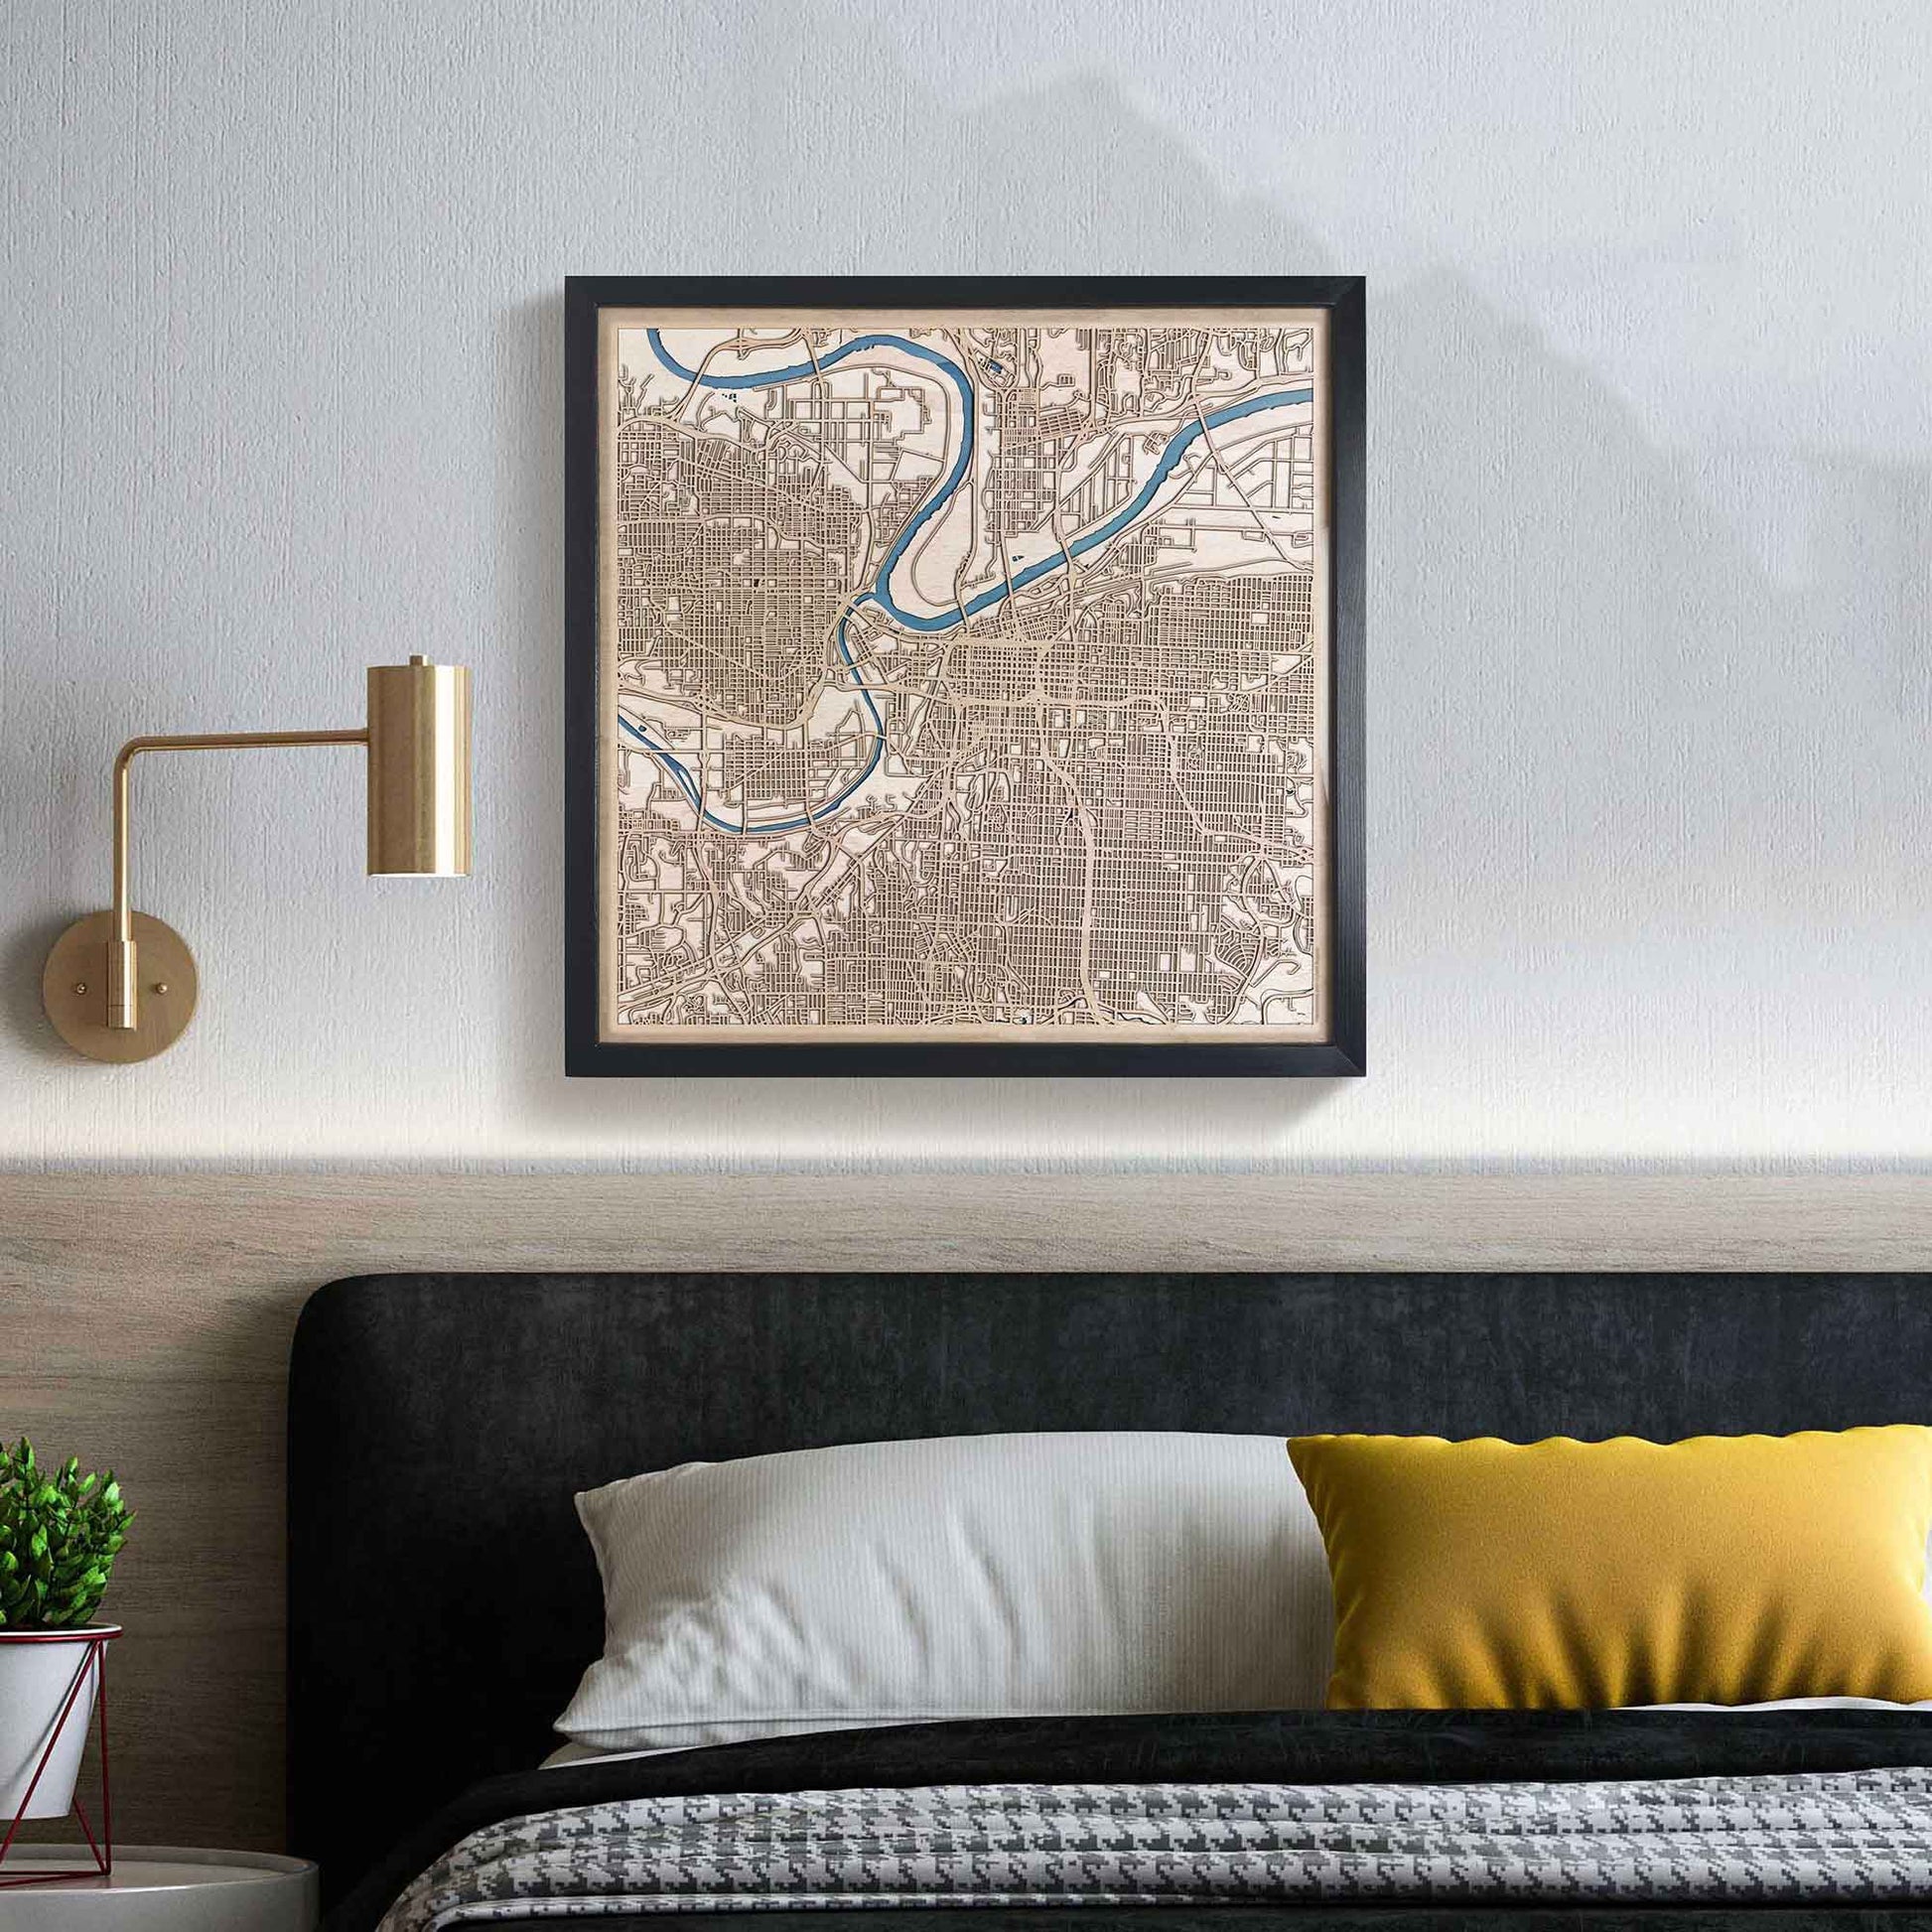 Kansas City Wooden Map by CityWood - Custom Wood Map Art - Unique Laser Cut Engraved - Anniversary Gift